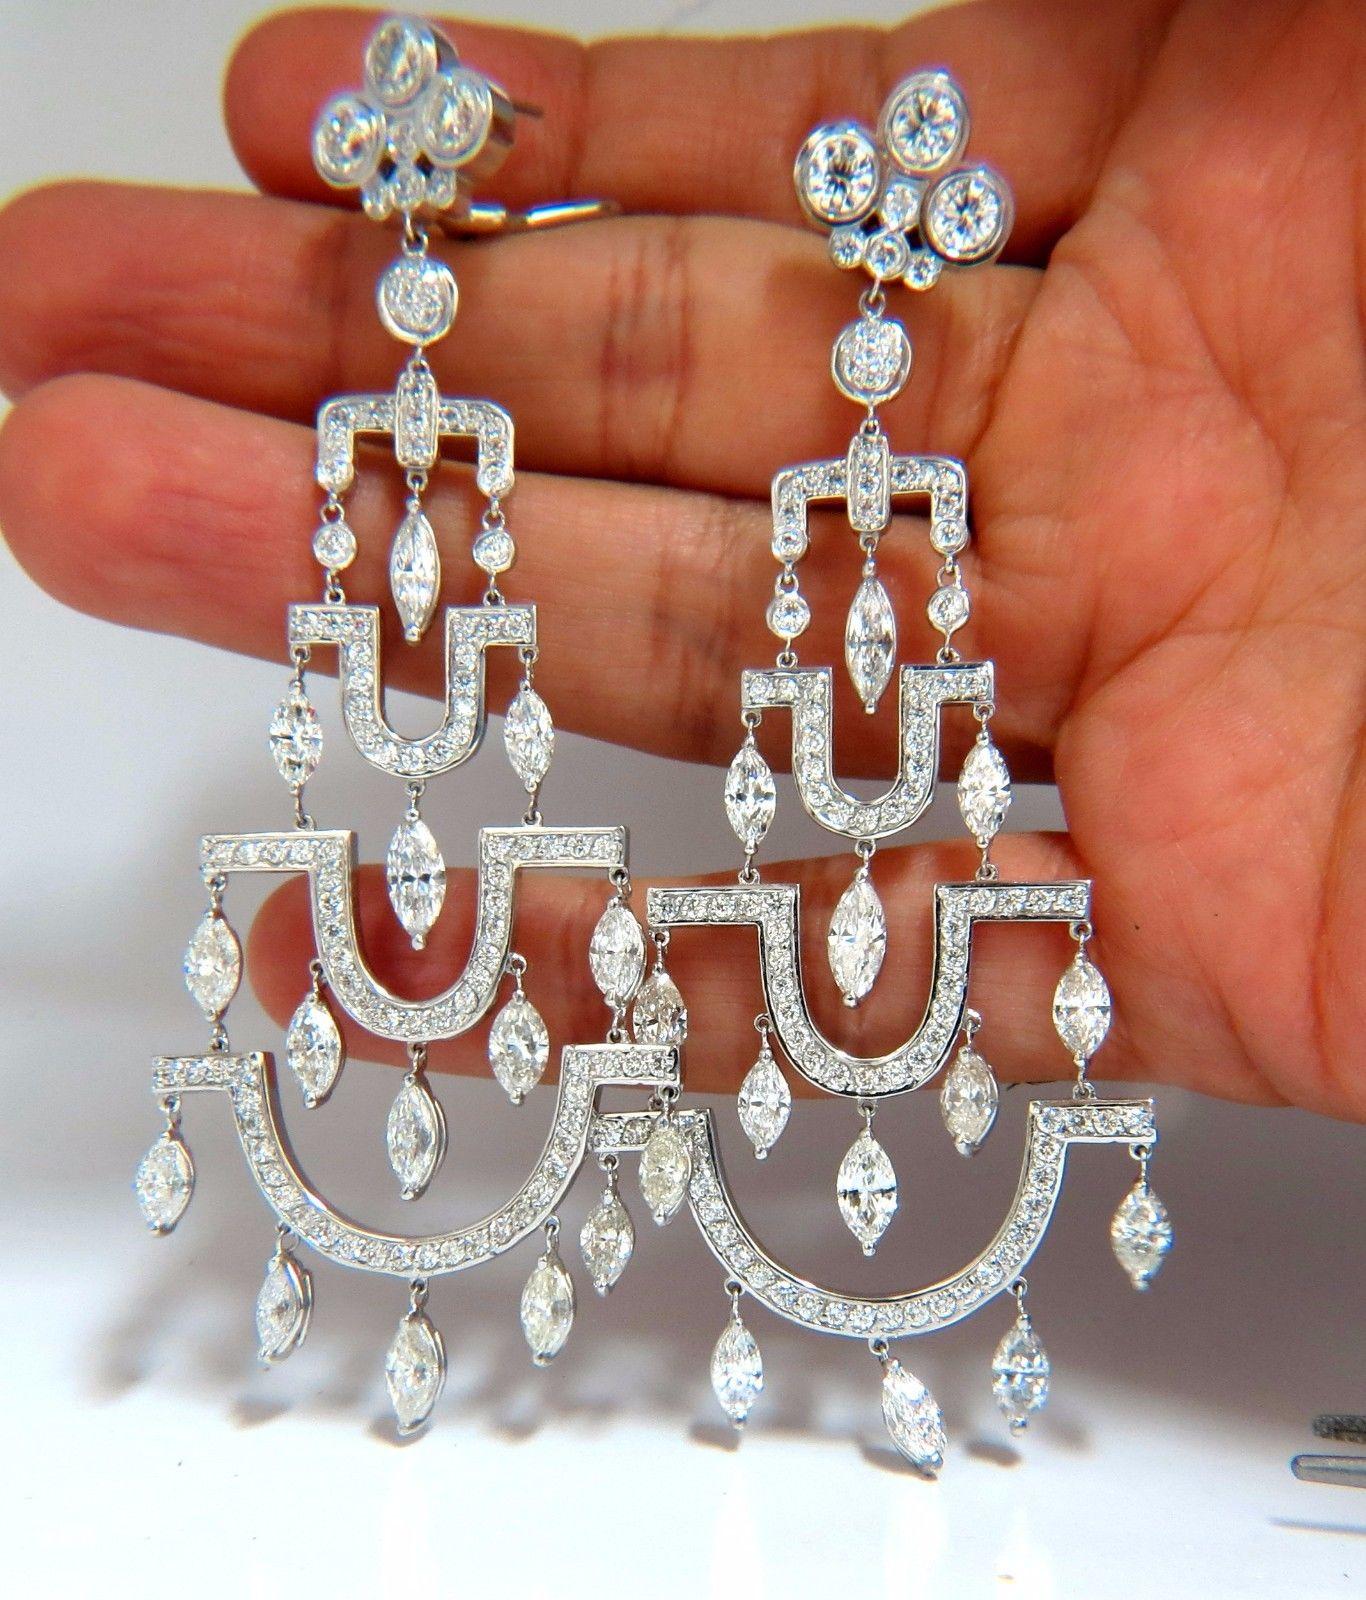 The Art Deco Edge.

The classic long chandelier earrings.

16.00cts of natural round diamonds: 

G/H-color, Vs-2 & si-1 clarity.

14kt. white gold

34.7 grams.

Earrings measure: 3.80 Inch Length

Lower Tier: 1.54 inch

upper tier: .60